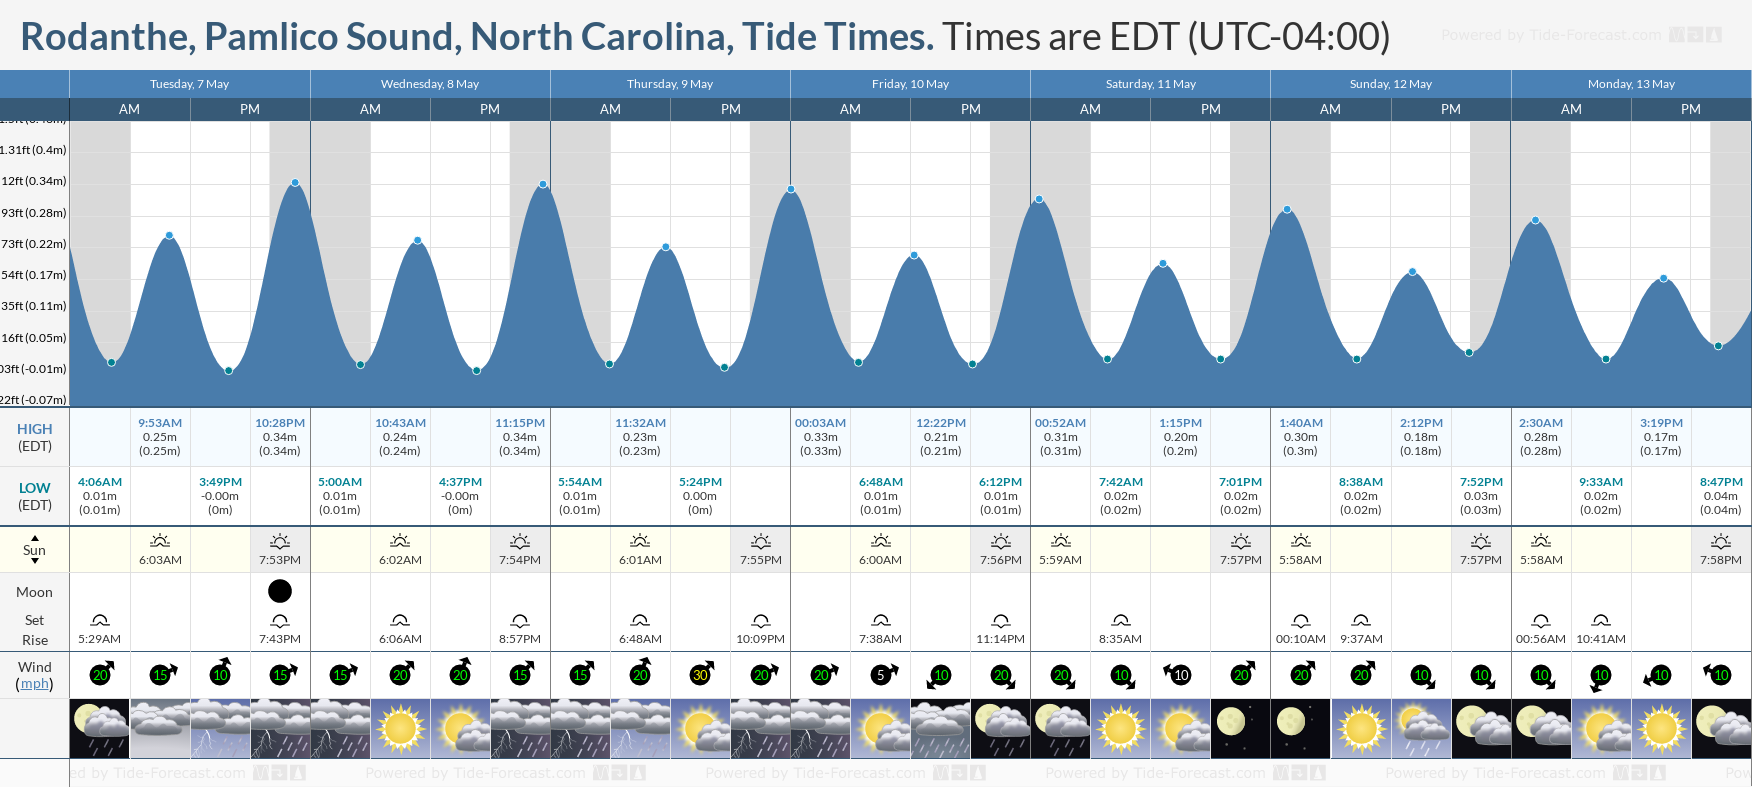 Rodanthe, Pamlico Sound, North Carolina Tide Chart including high and low tide tide times for the next 7 days